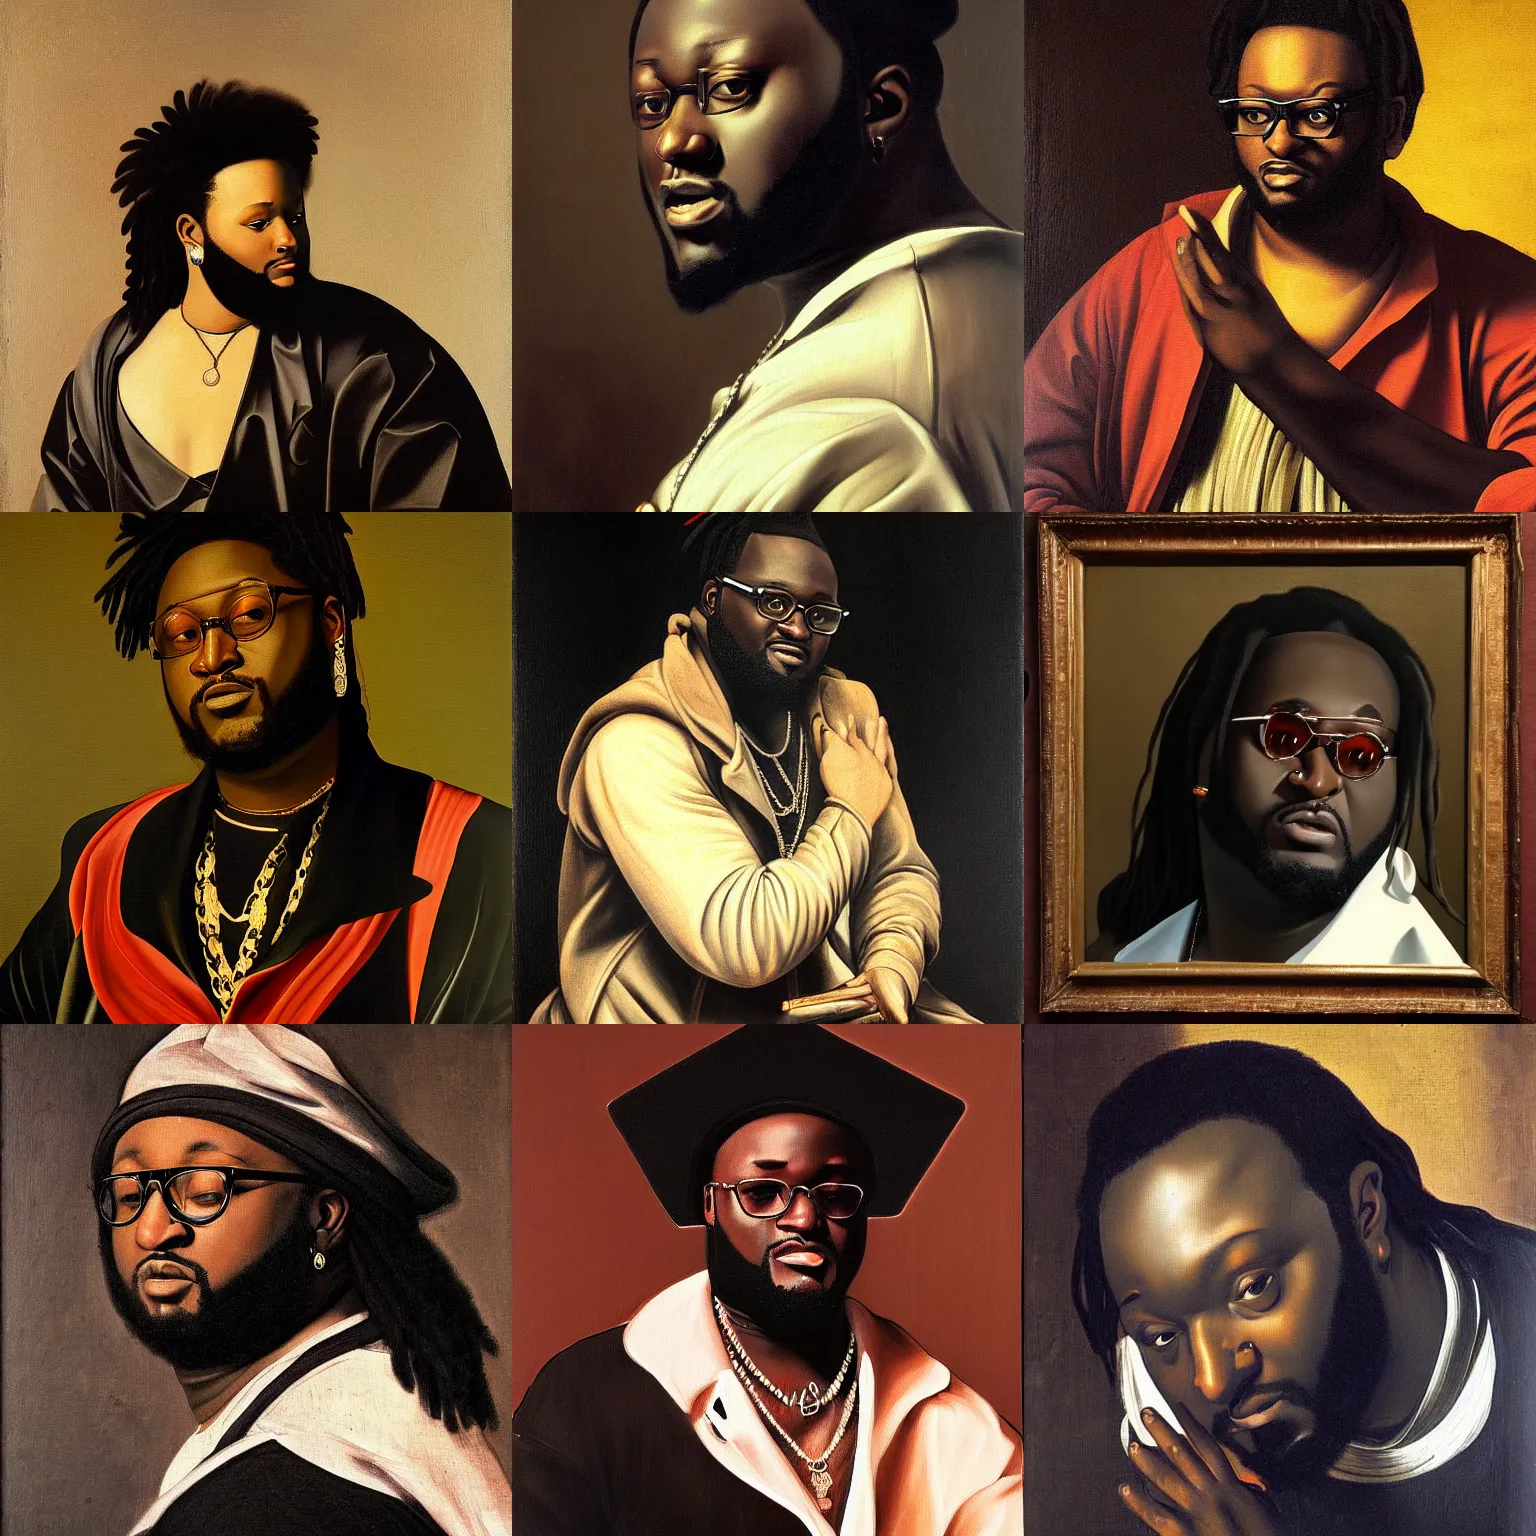 Prompt: a tenebrism painting of t - pain by caravaggio